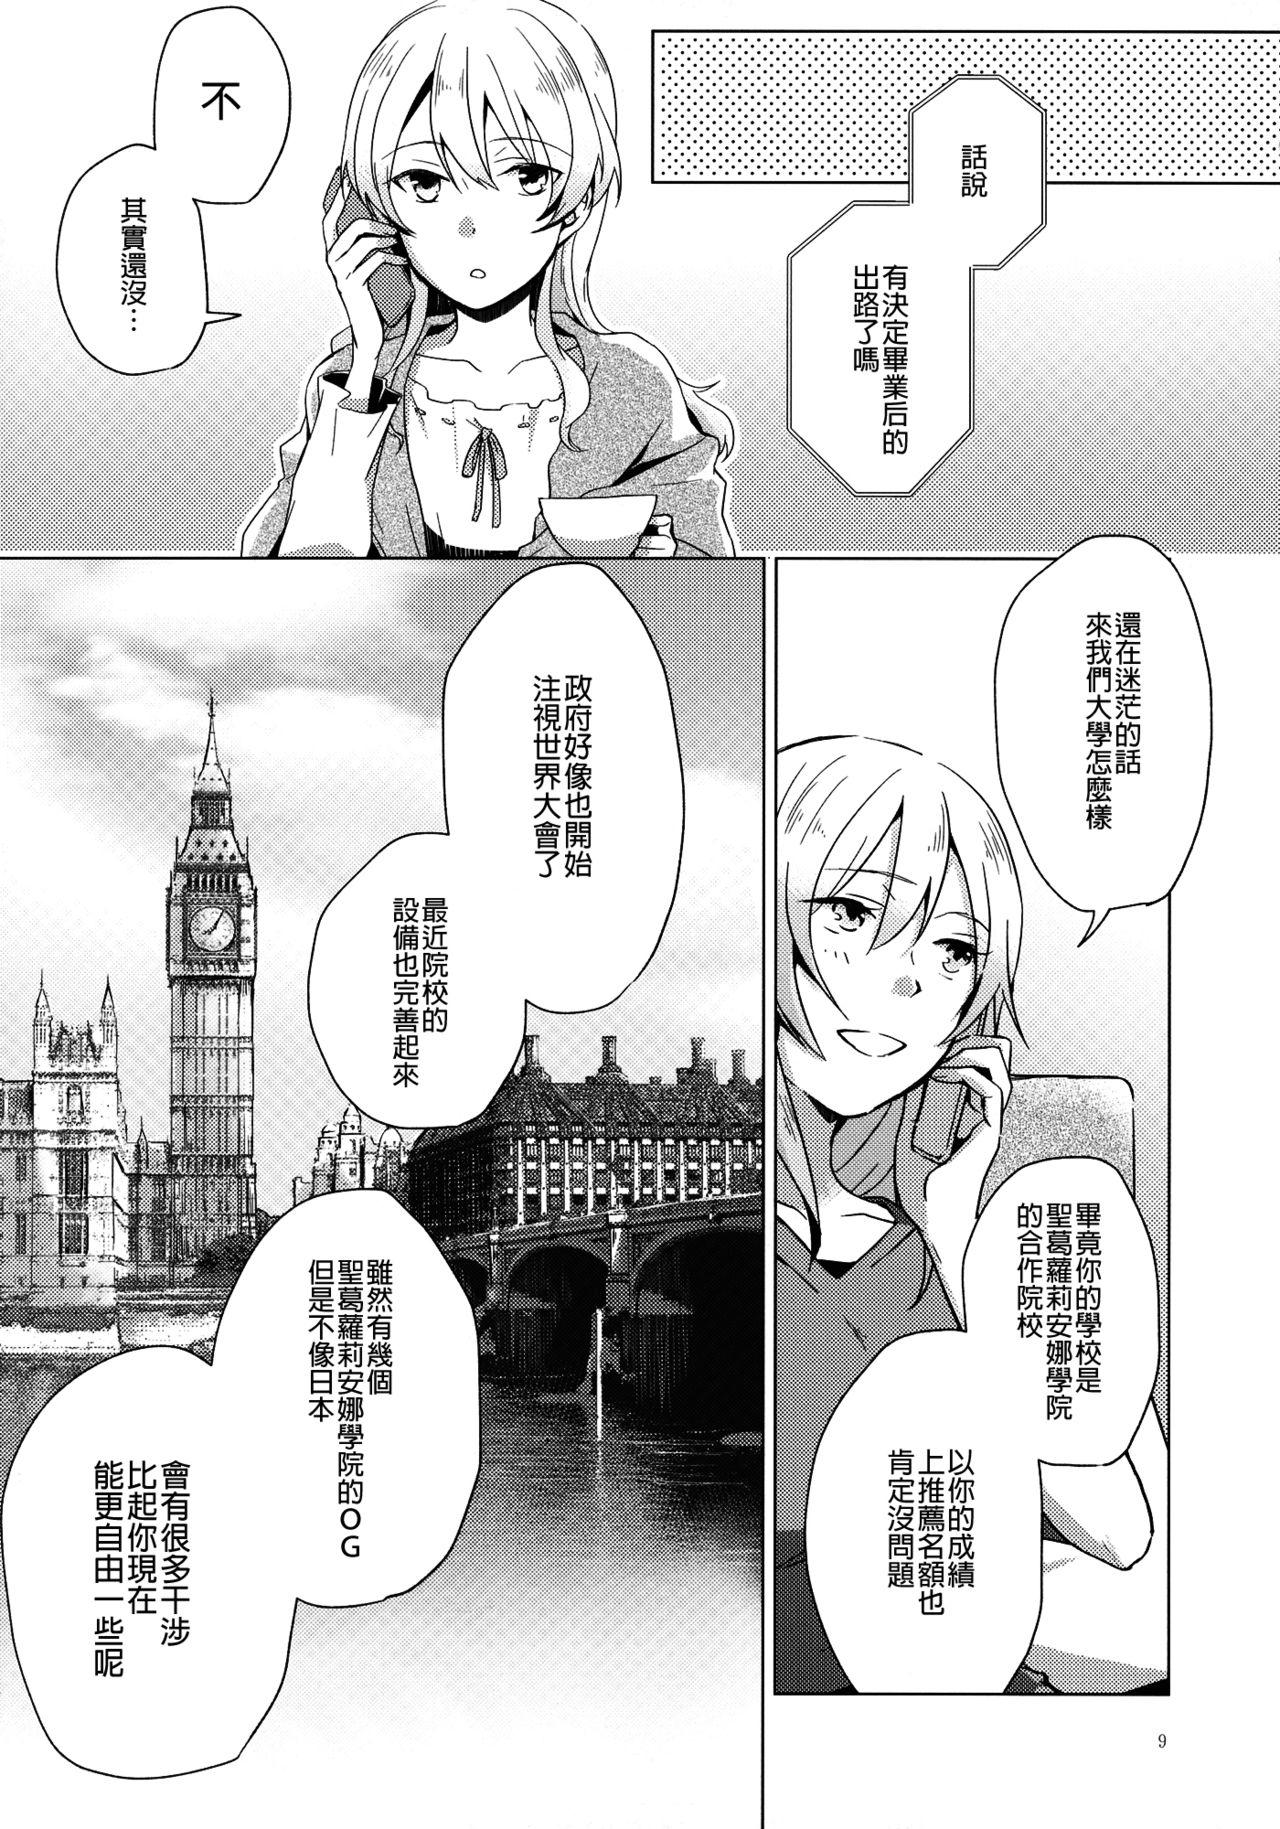 China Over Time | 超時 - Girls und panzer Amateur - Page 9